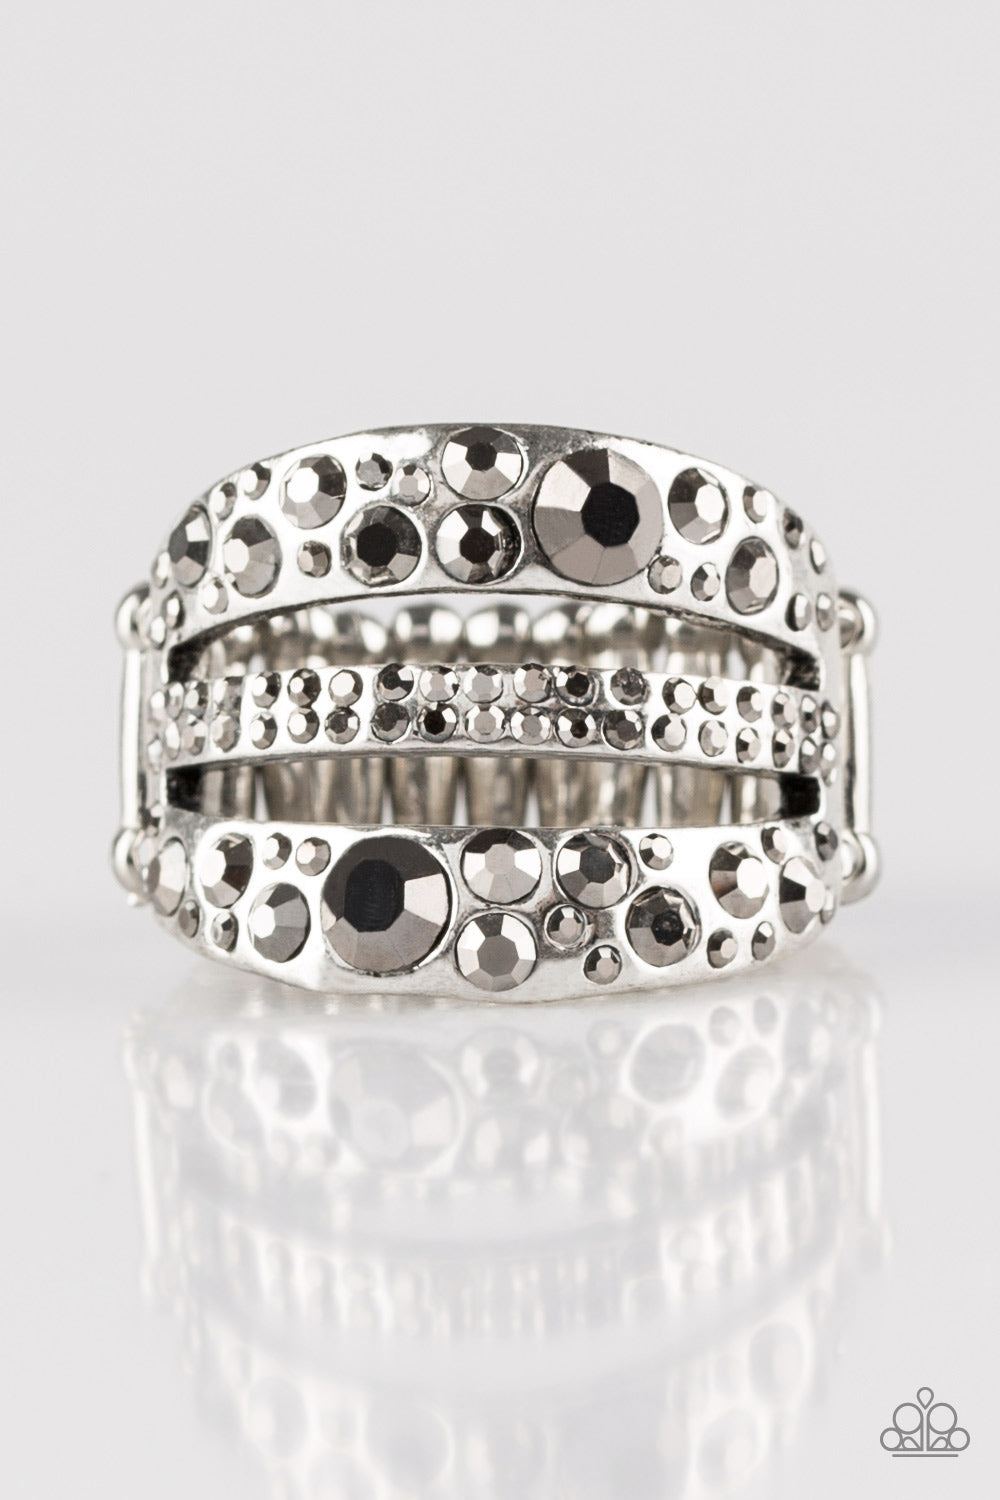 Paparazzi Stacks On Stacks On Stacks - Studio Bling by Glam With Mack